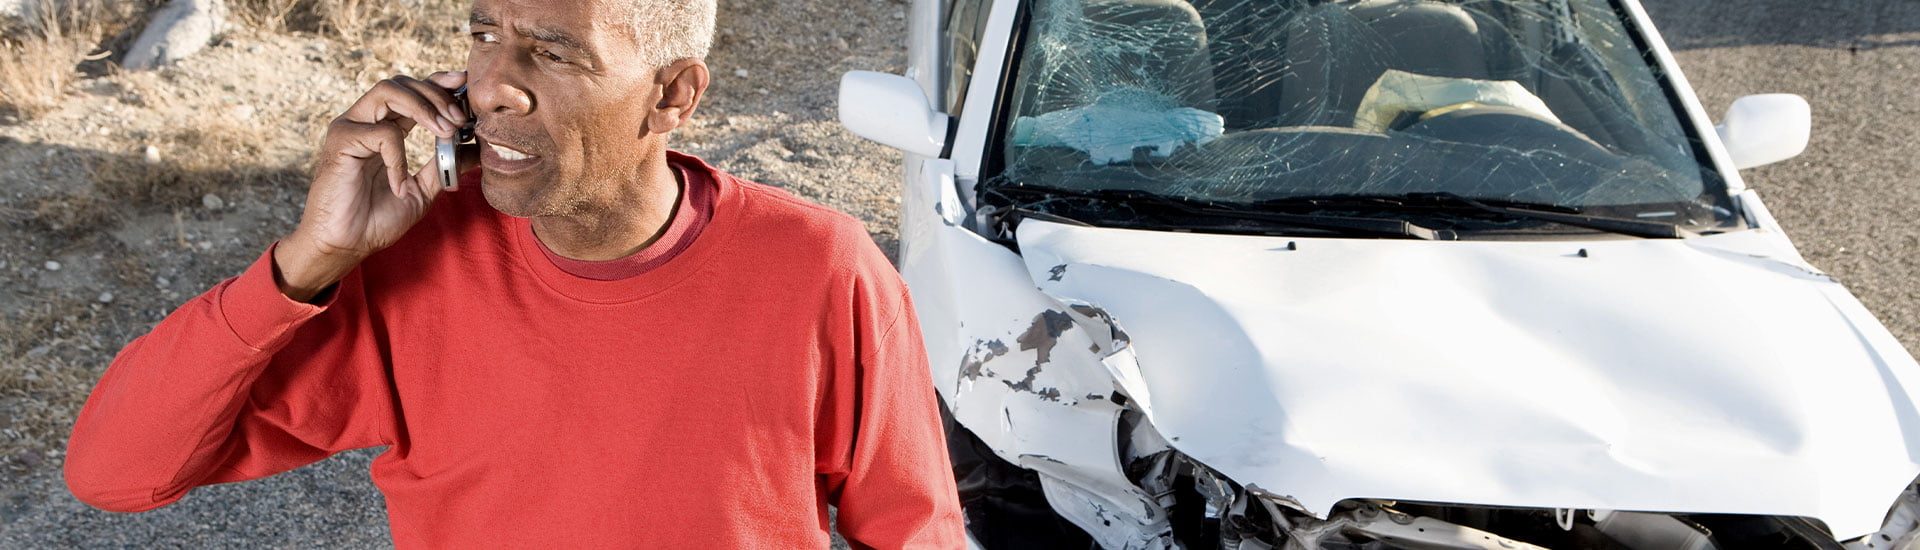 car accident process claims